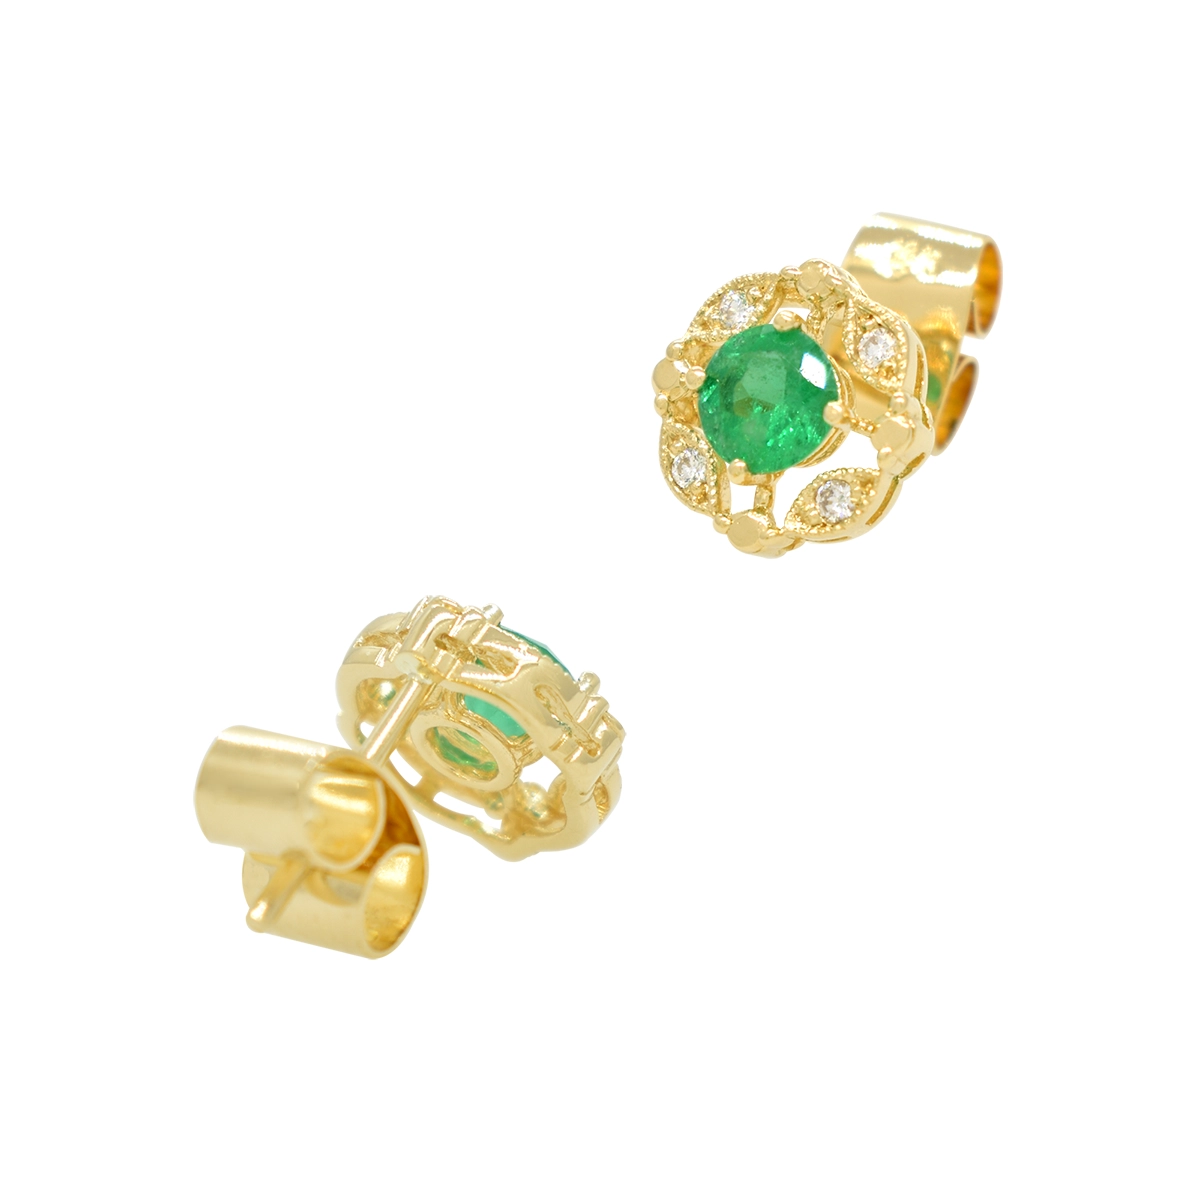 These beautiful emerald and diamond stud earrings are custom-made and handcrafted, especially for this gemstones in solid 18K gold